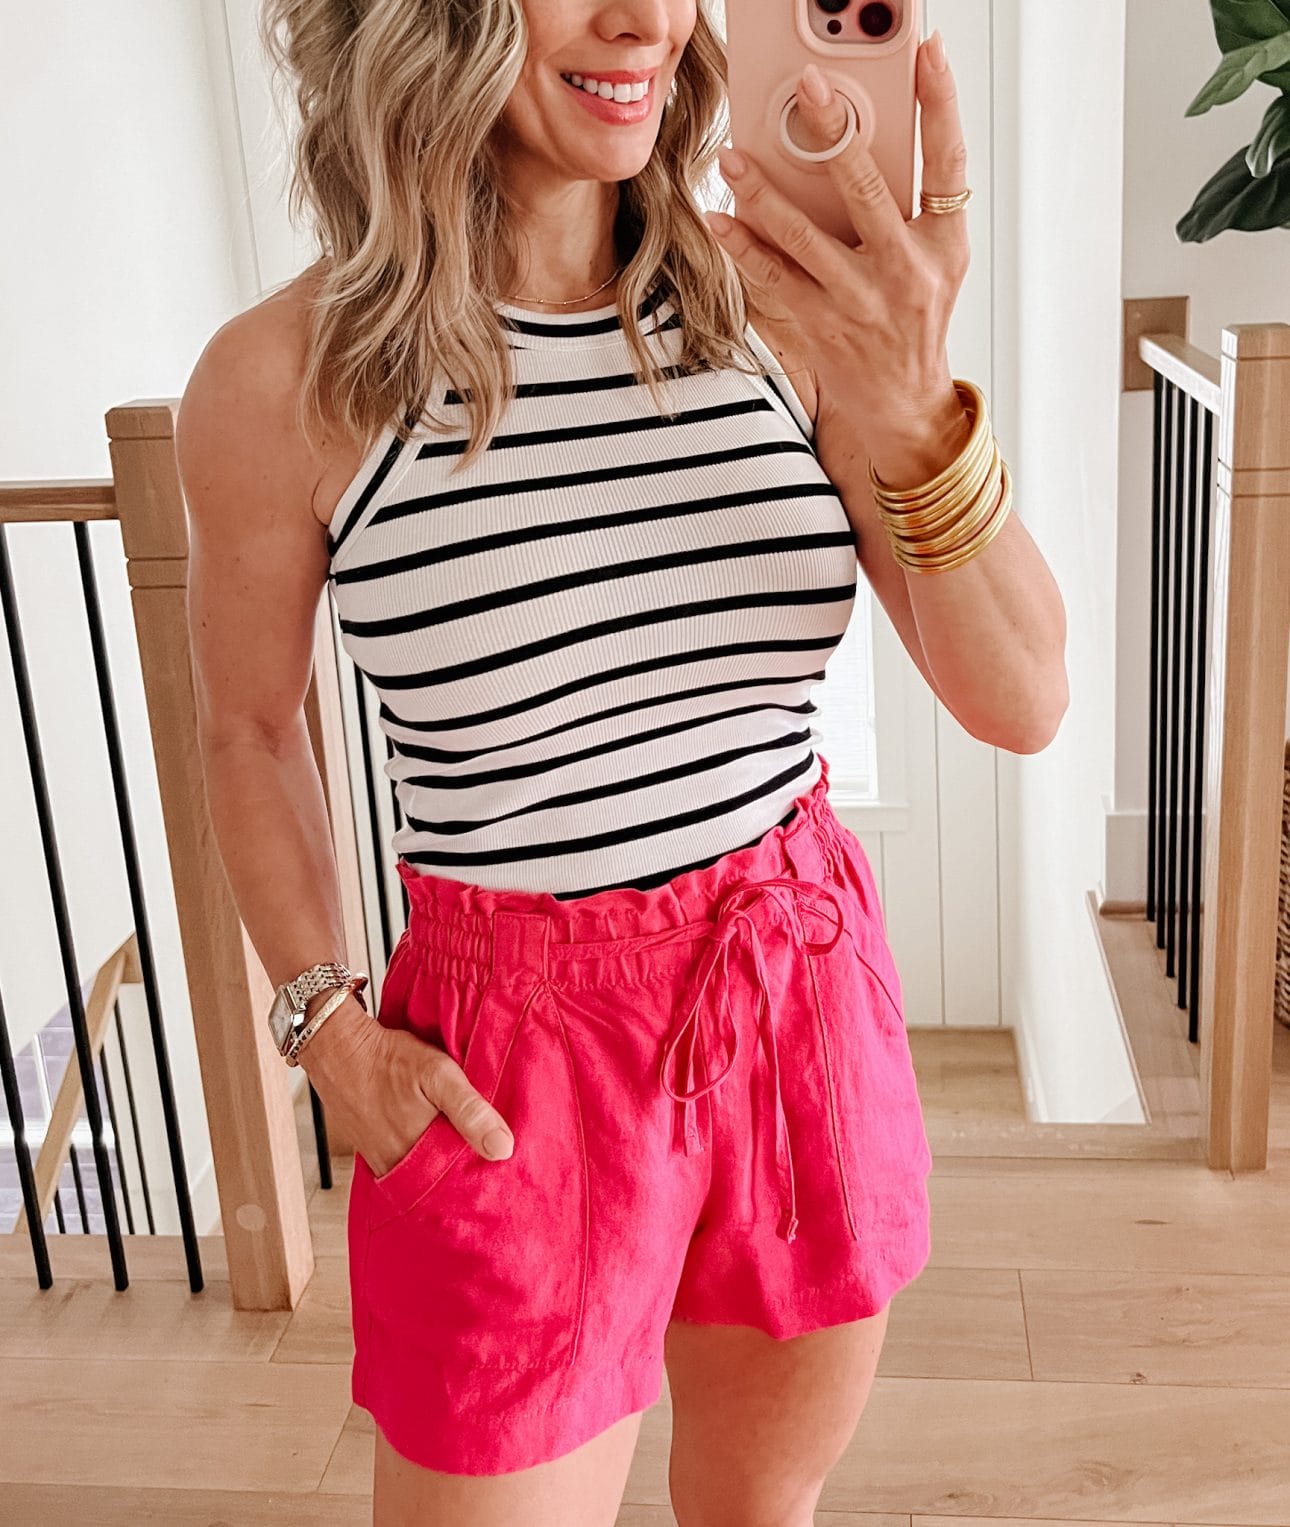 Striped Tank, Pink Shorts, Wedges 